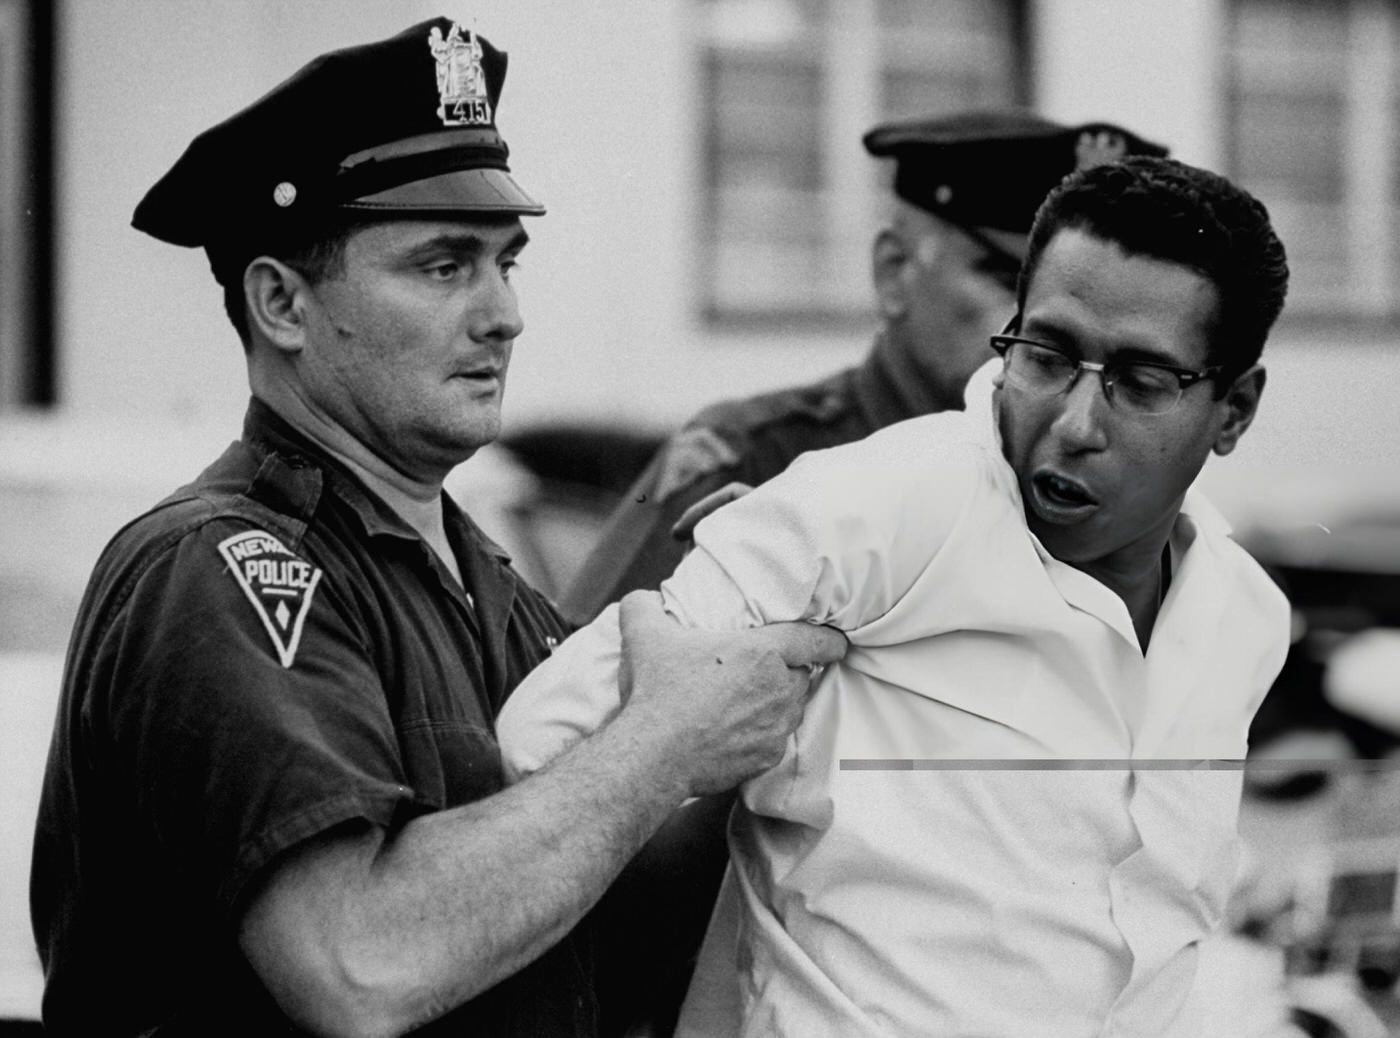 A policeman arrests a suspect during riots, 1960s.